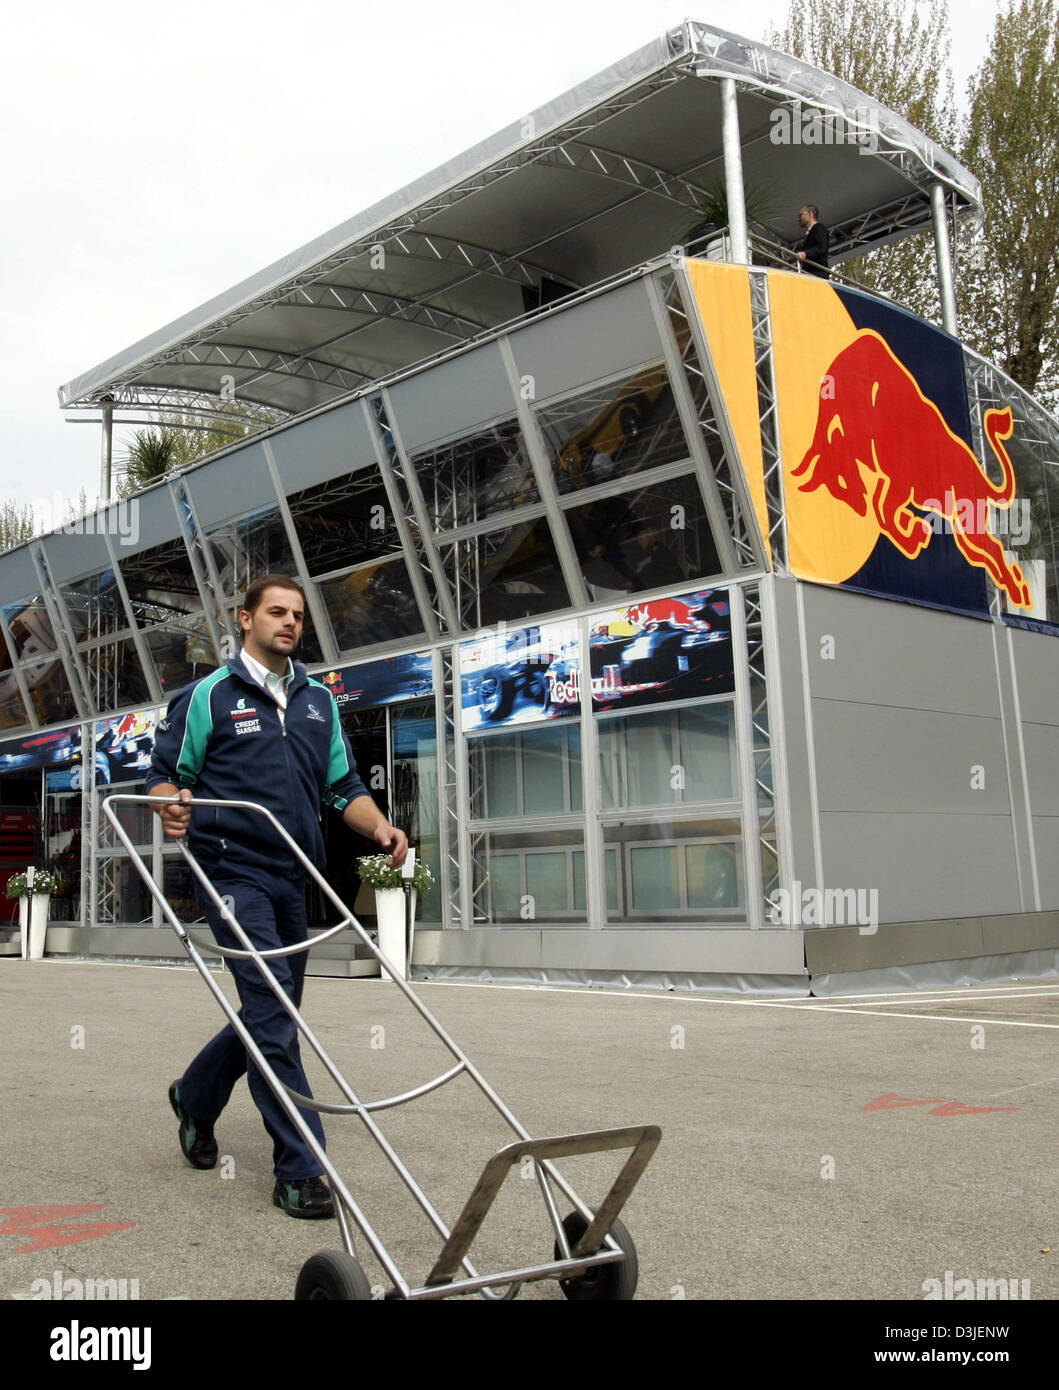 Pounding ovn grøntsager dpa) - A mechanic passes the new hospitality of the Red Bull Racing Team in  the paddock at the formula one racetrack, in Imola, Italy, Thursday 21  April 2005. The building is